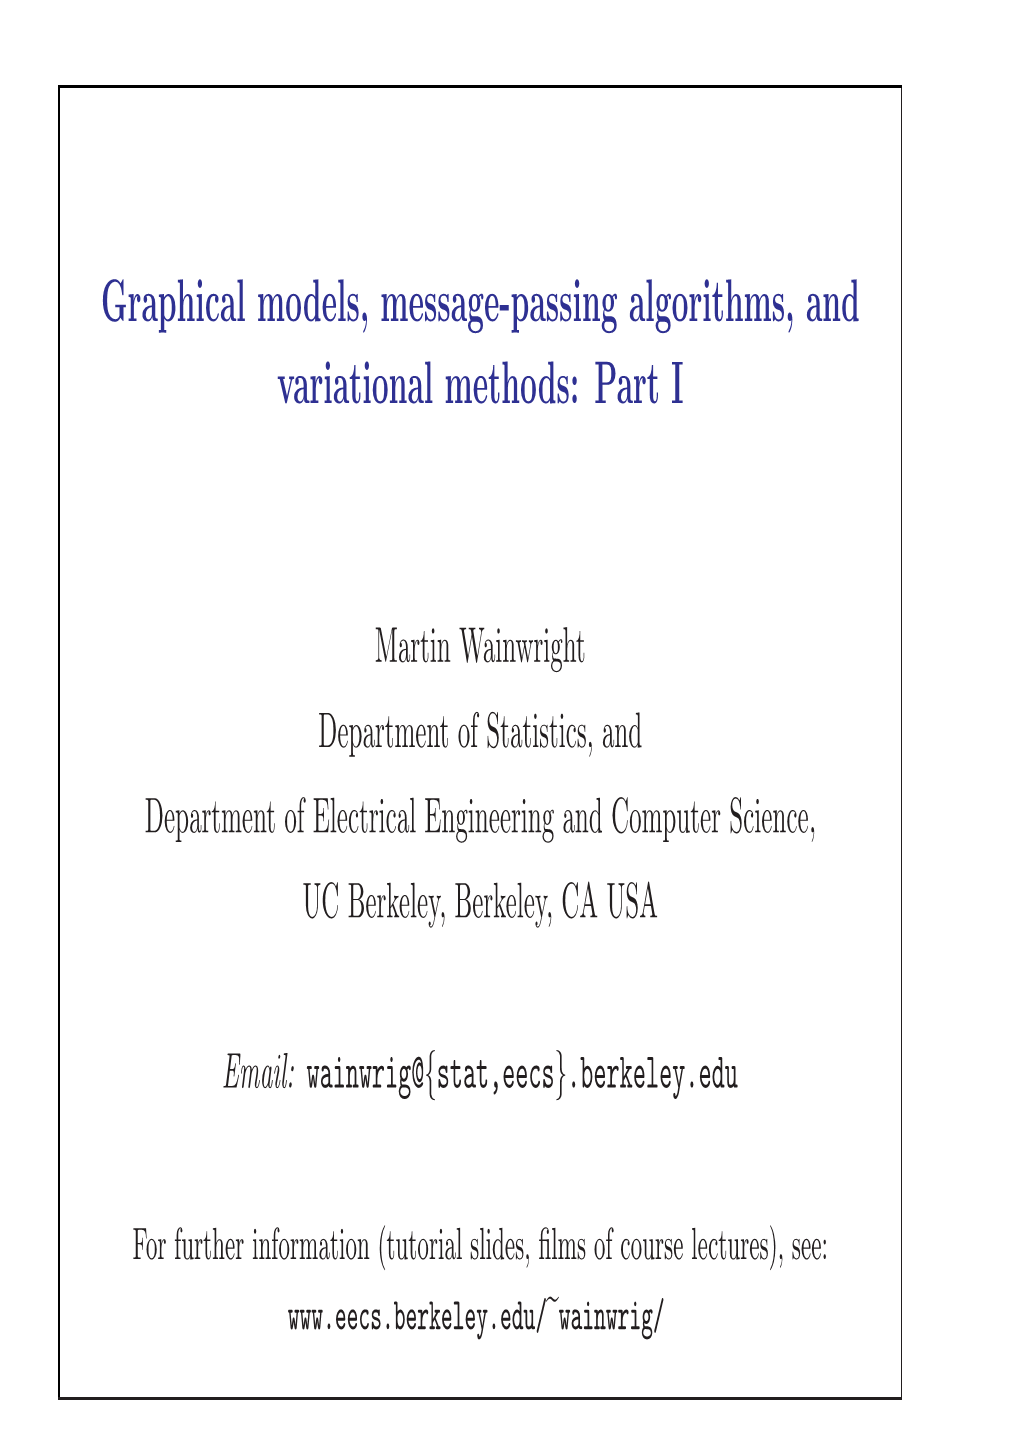 Graphical Models, Message-Passing Algorithms, and Variational Methods: Part I